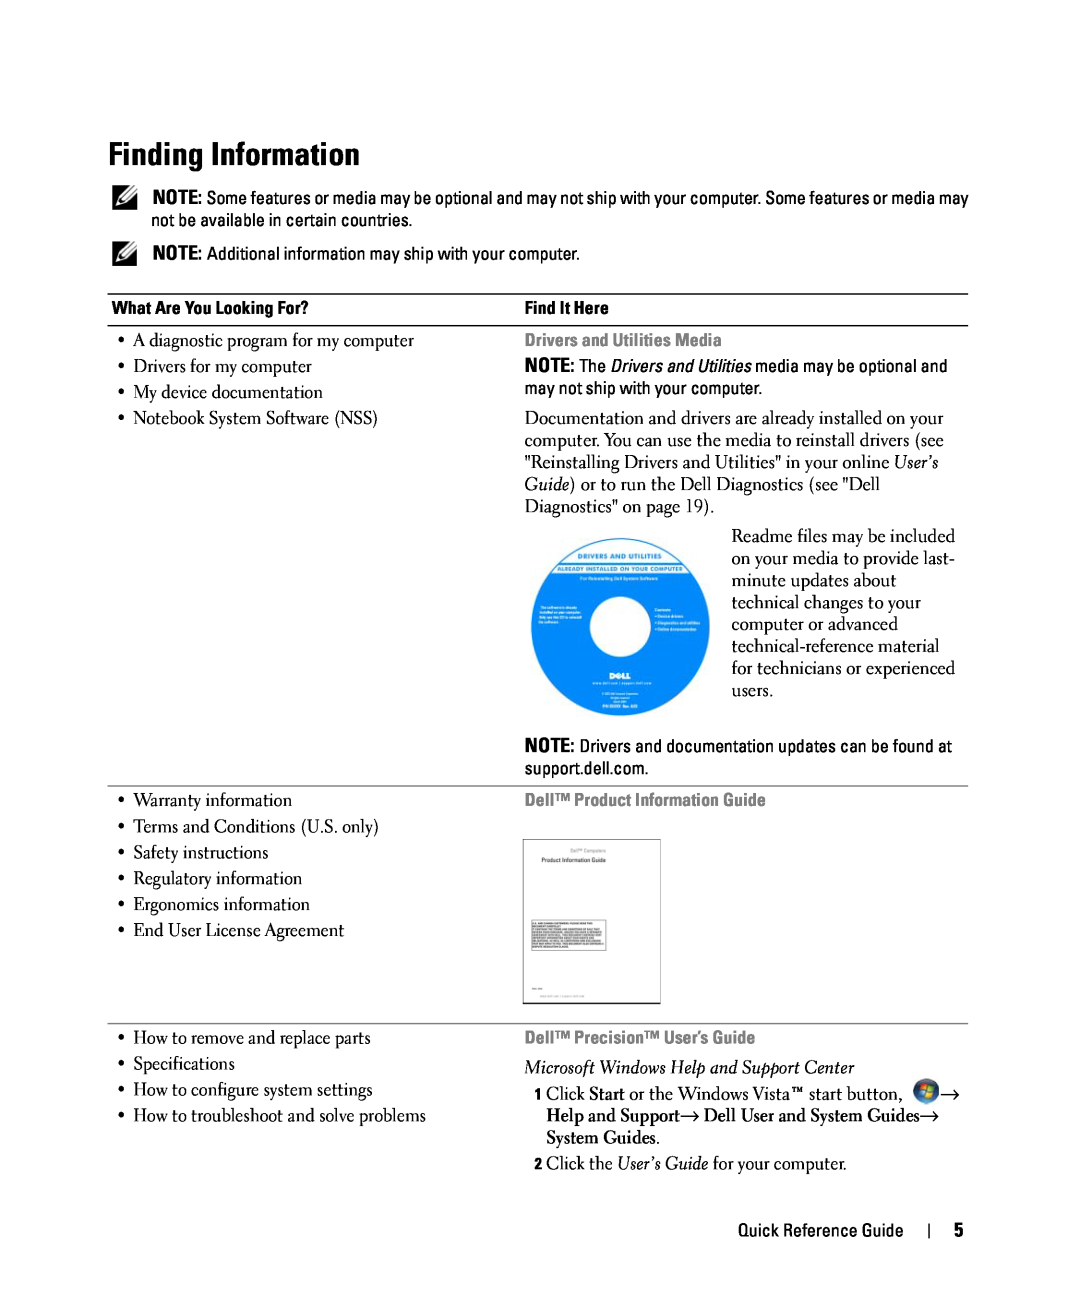 Dell GU806 manual Finding Information, What Are You Looking For?, Find It Here, Drivers and Utilities Media 